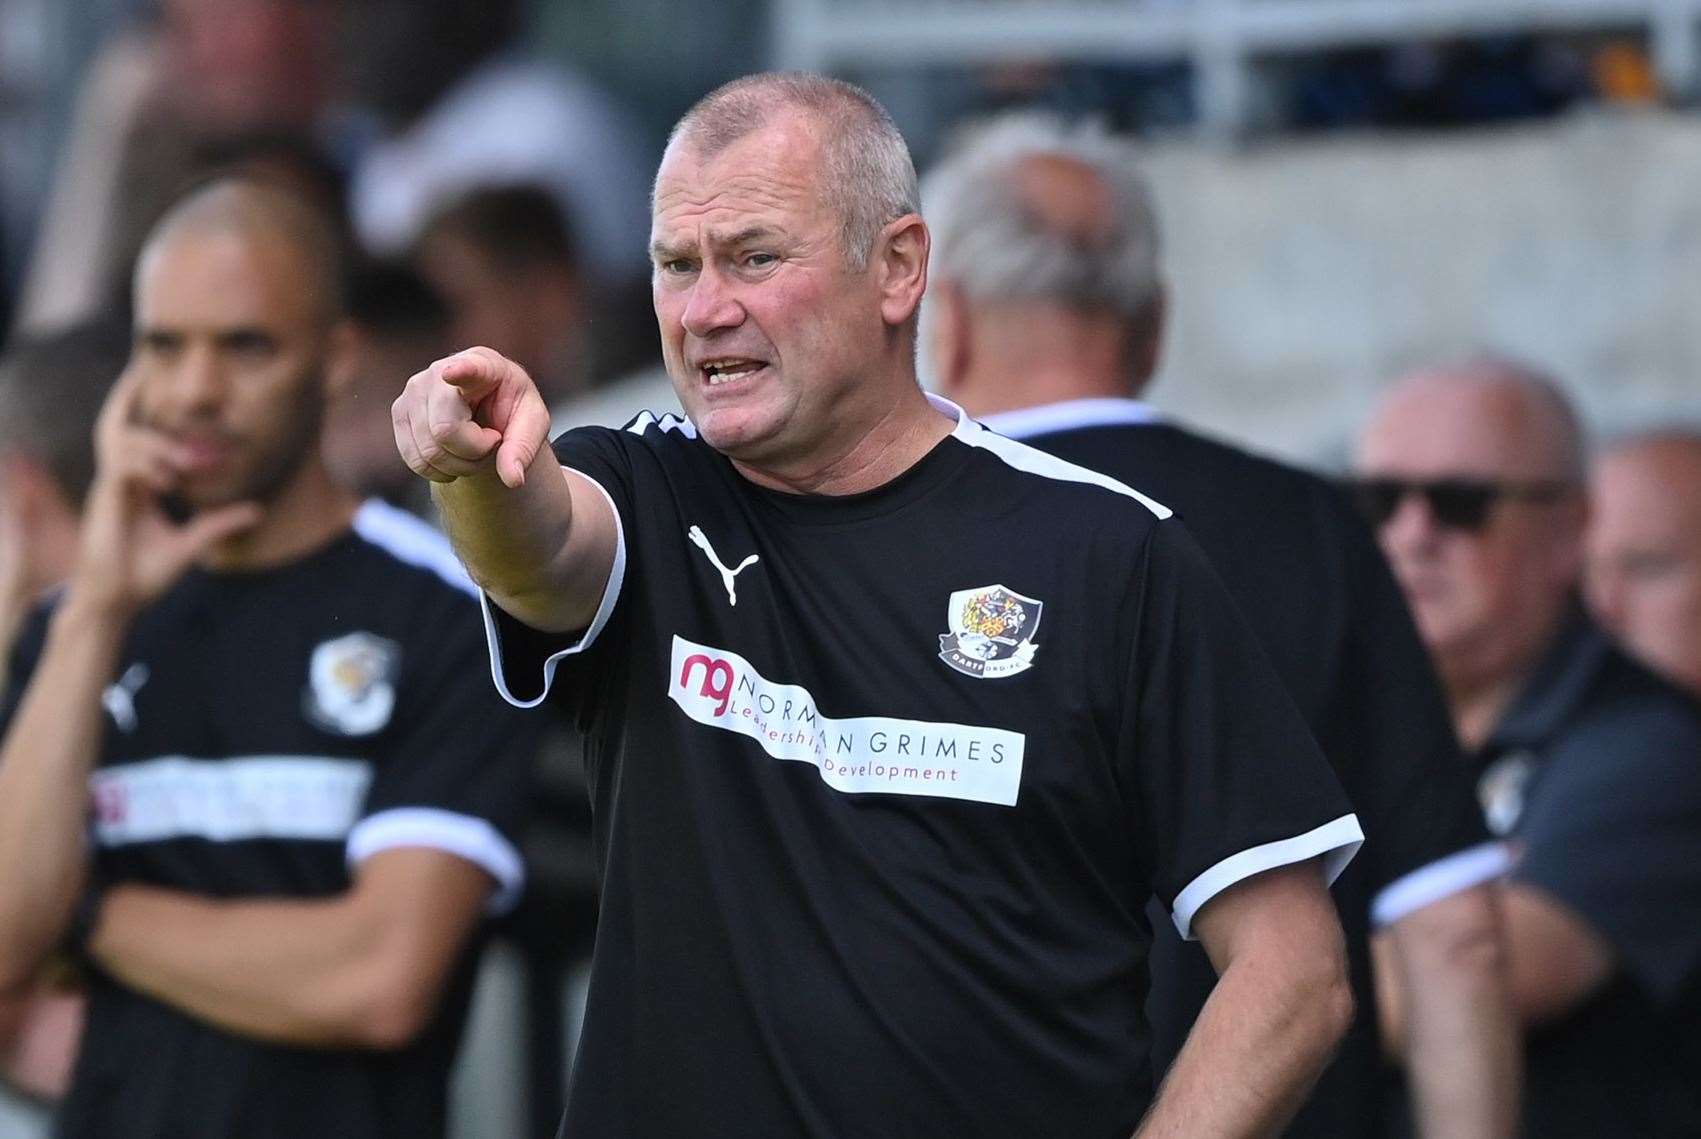 Dartford Manager Alan Dowson Says Everyone Has To Work Harder To Improve Results In National